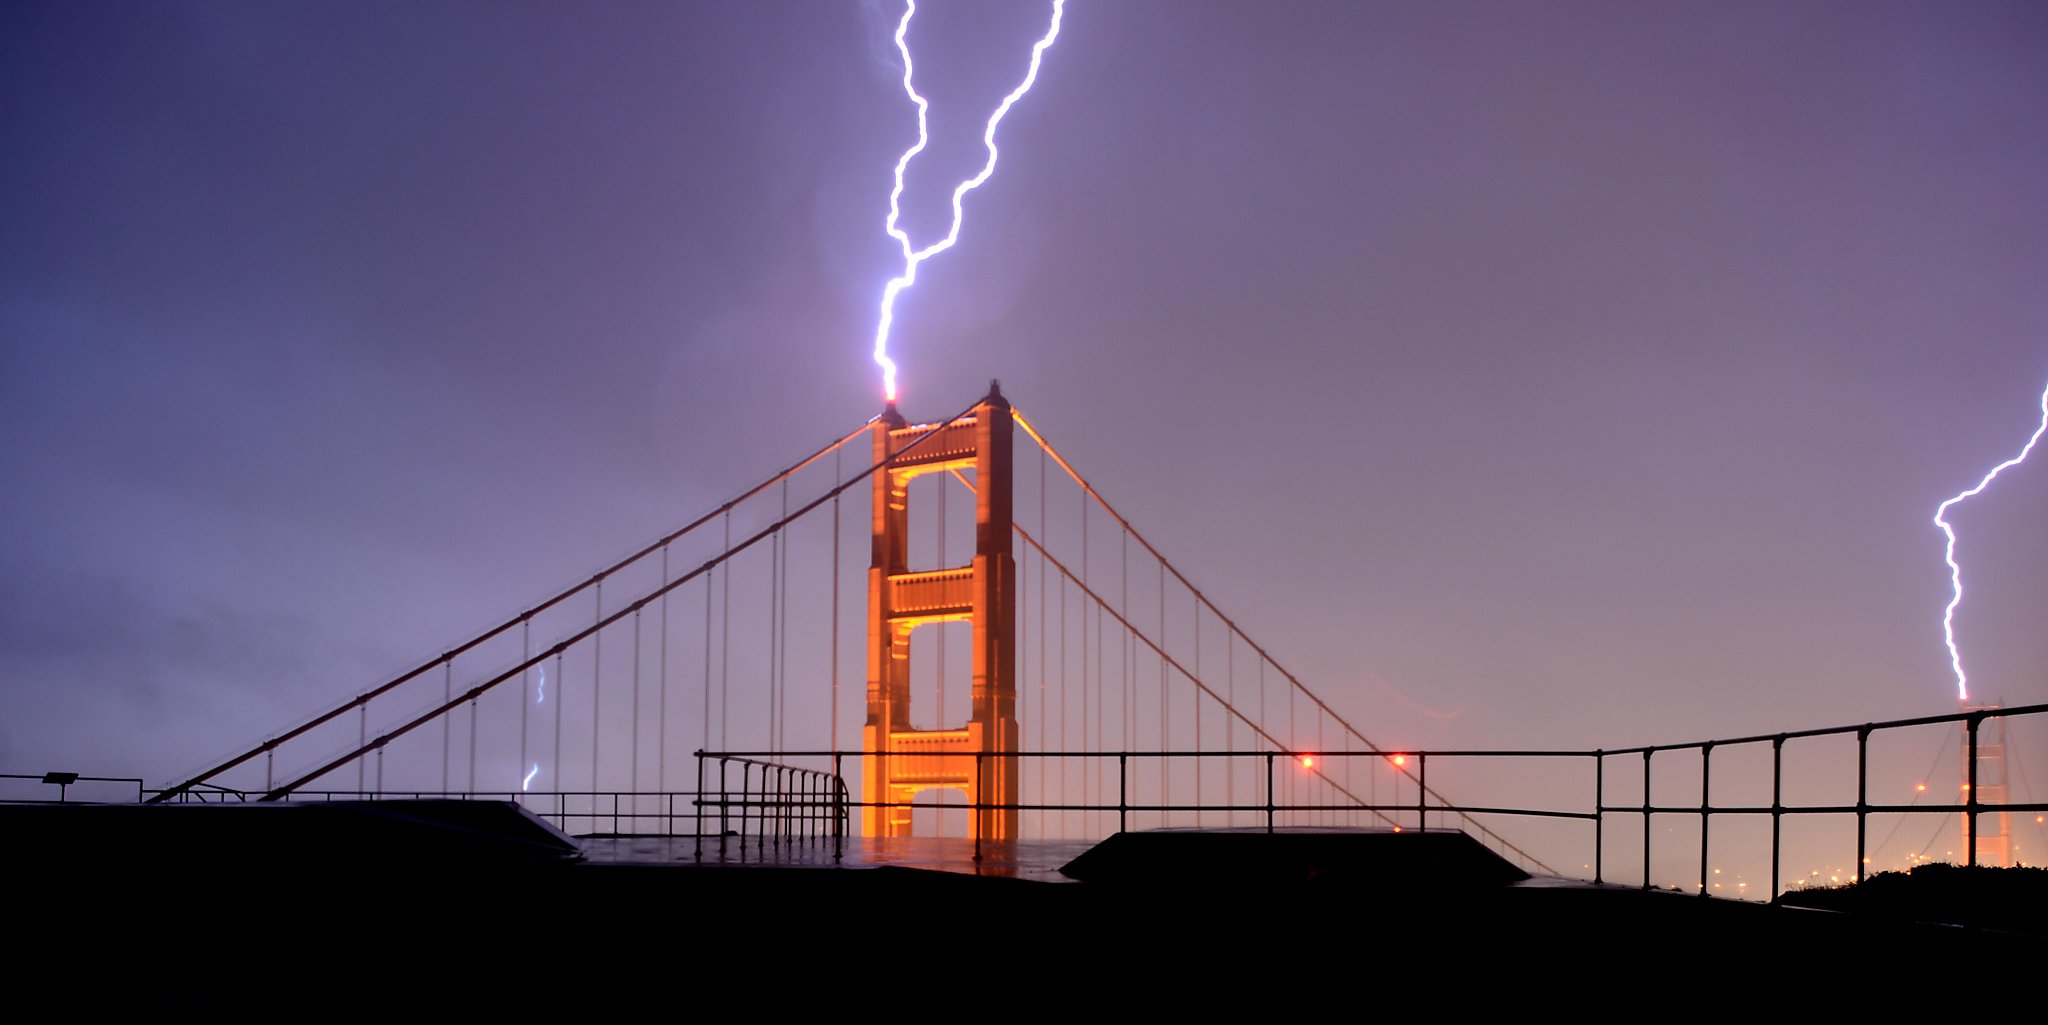 Thunder, lightning could hit Bay Area in weekend storm - San Francisco Chronicle